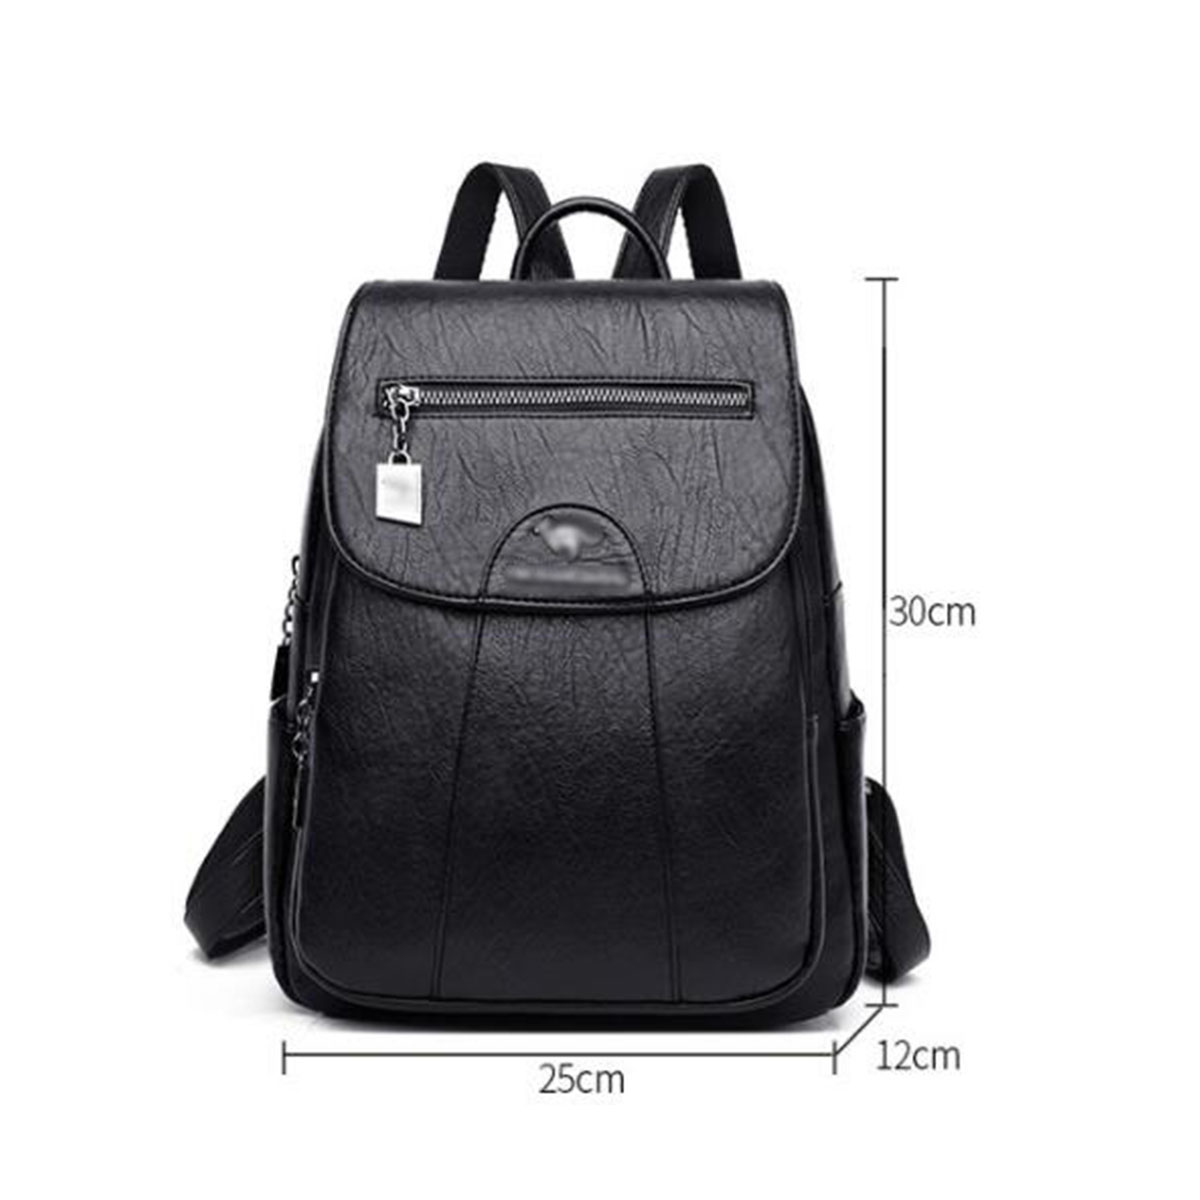 Retro PU Leather Women Backpacks Backpack Large Capacity School Bag for Girls Lady Travel Backpack-Brown - image 2 of 9